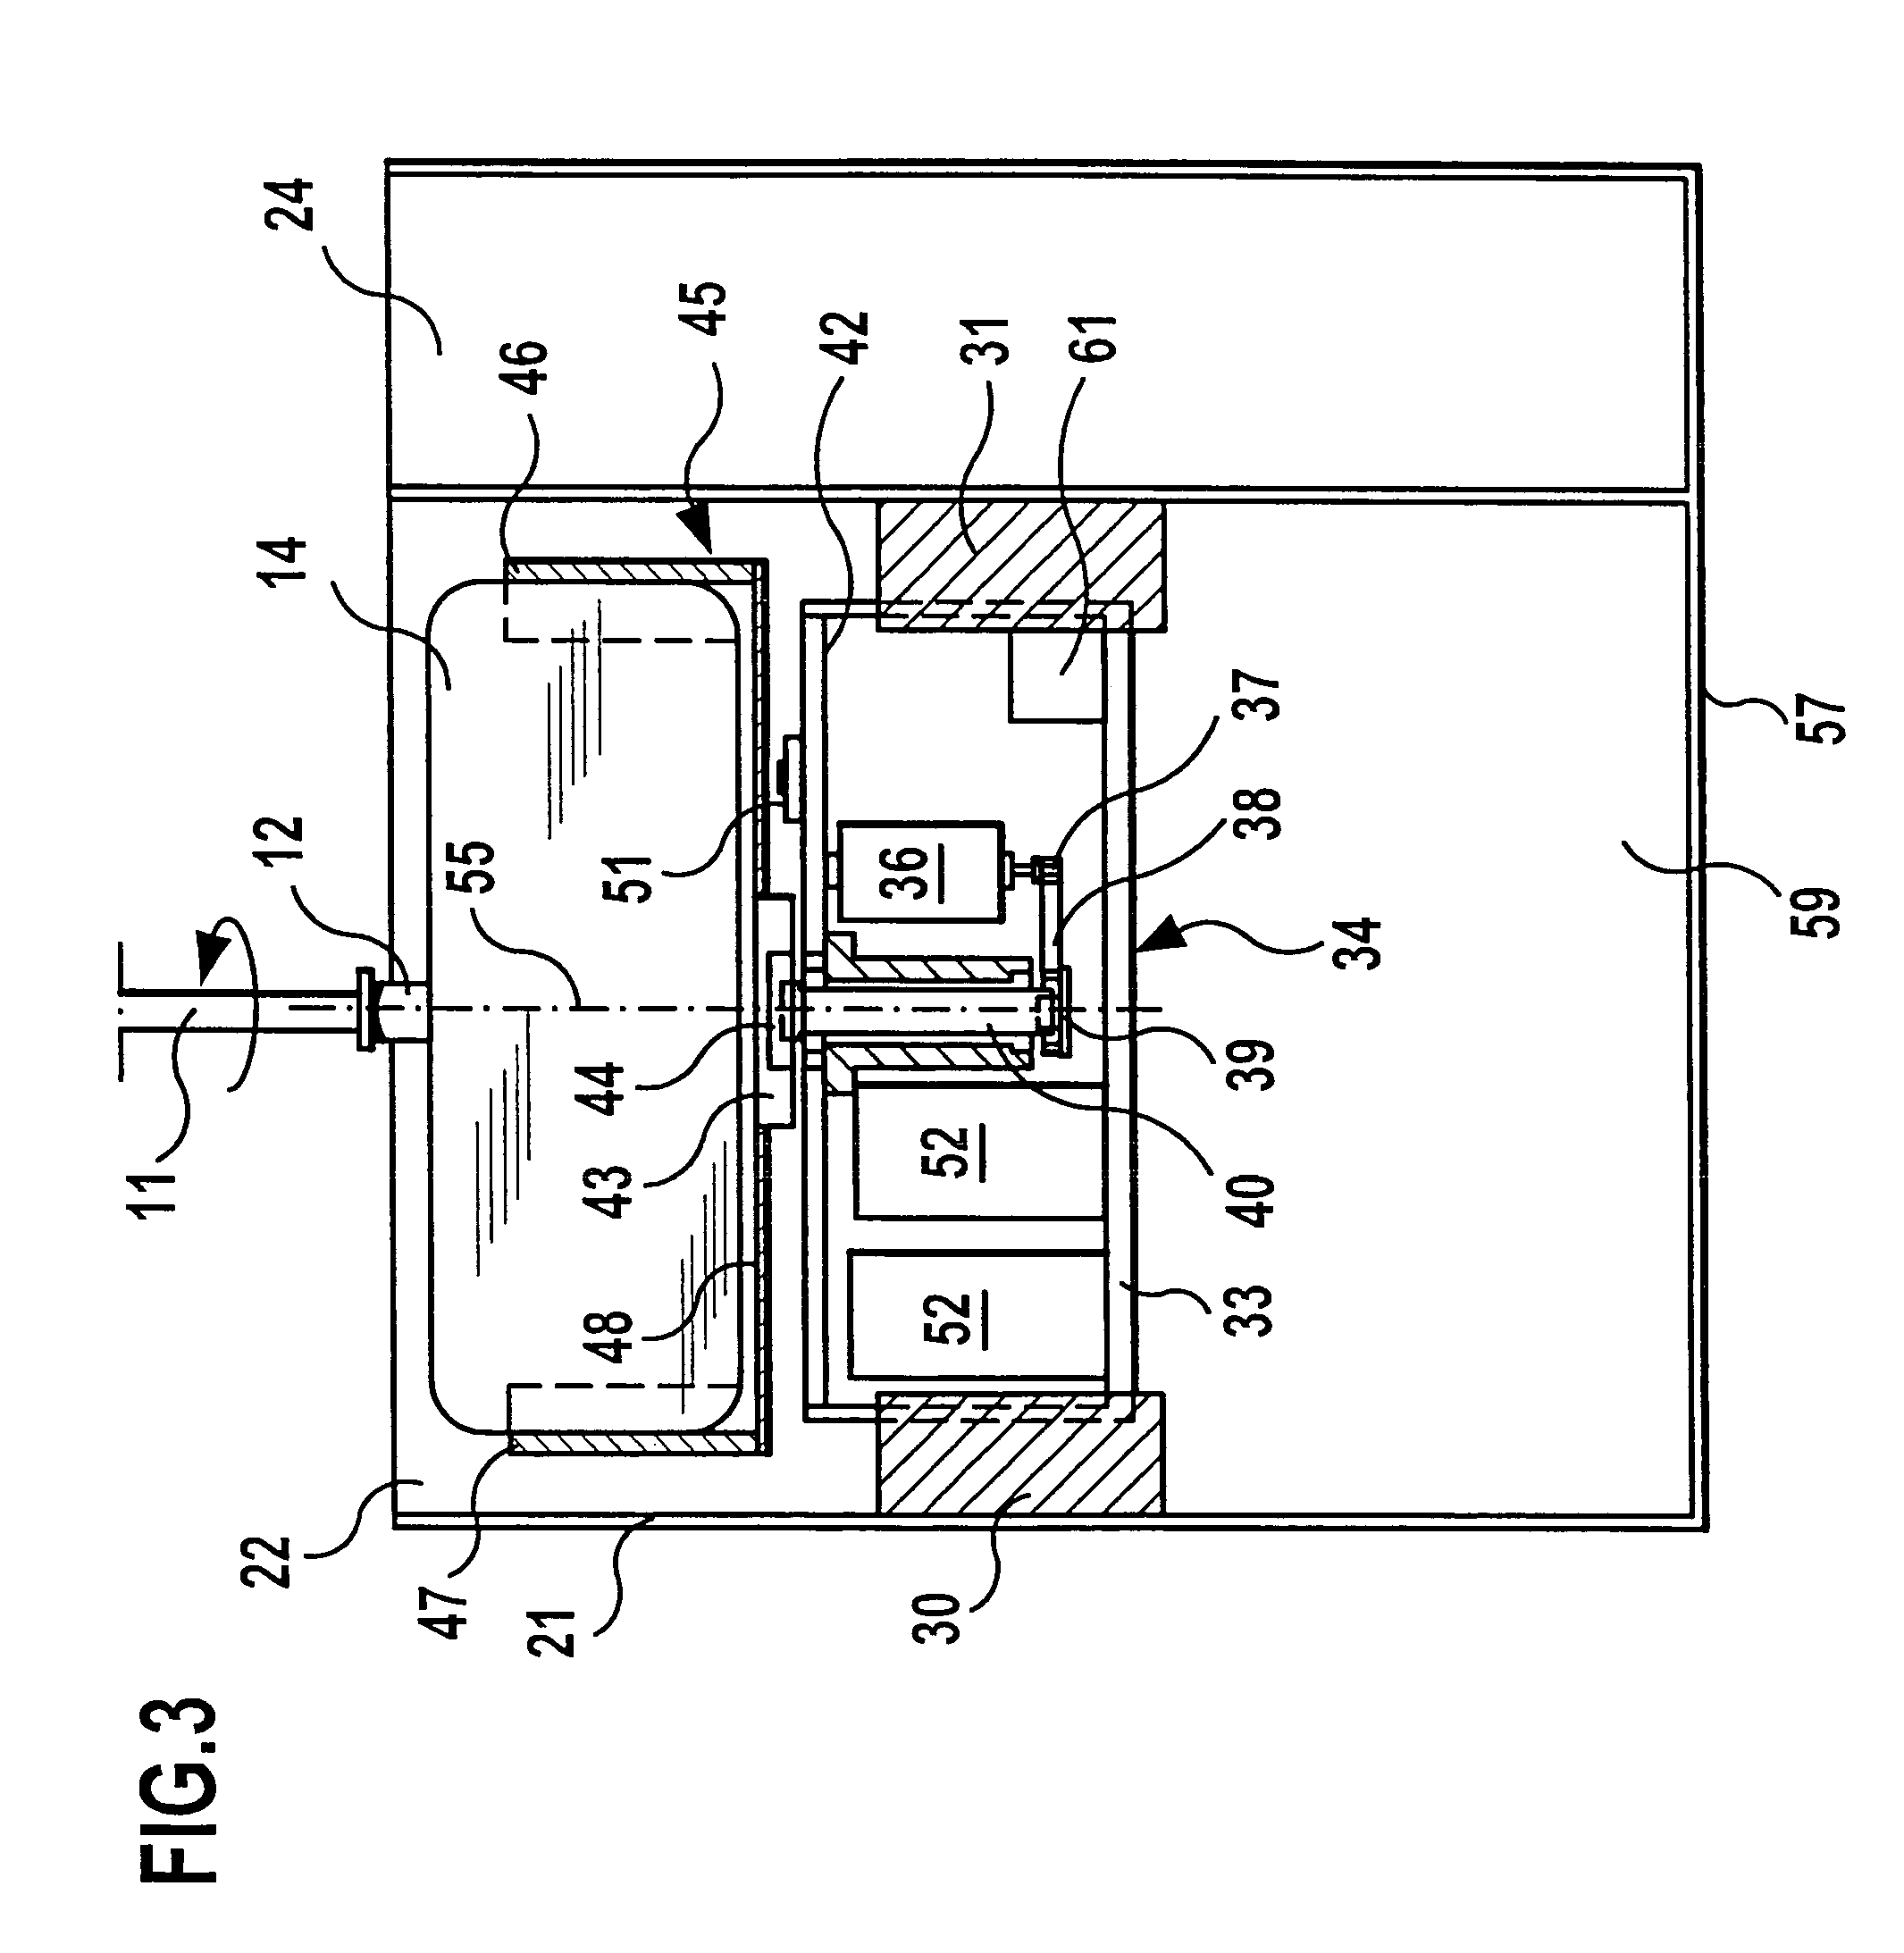 Device for expelling liquid from a wiping element